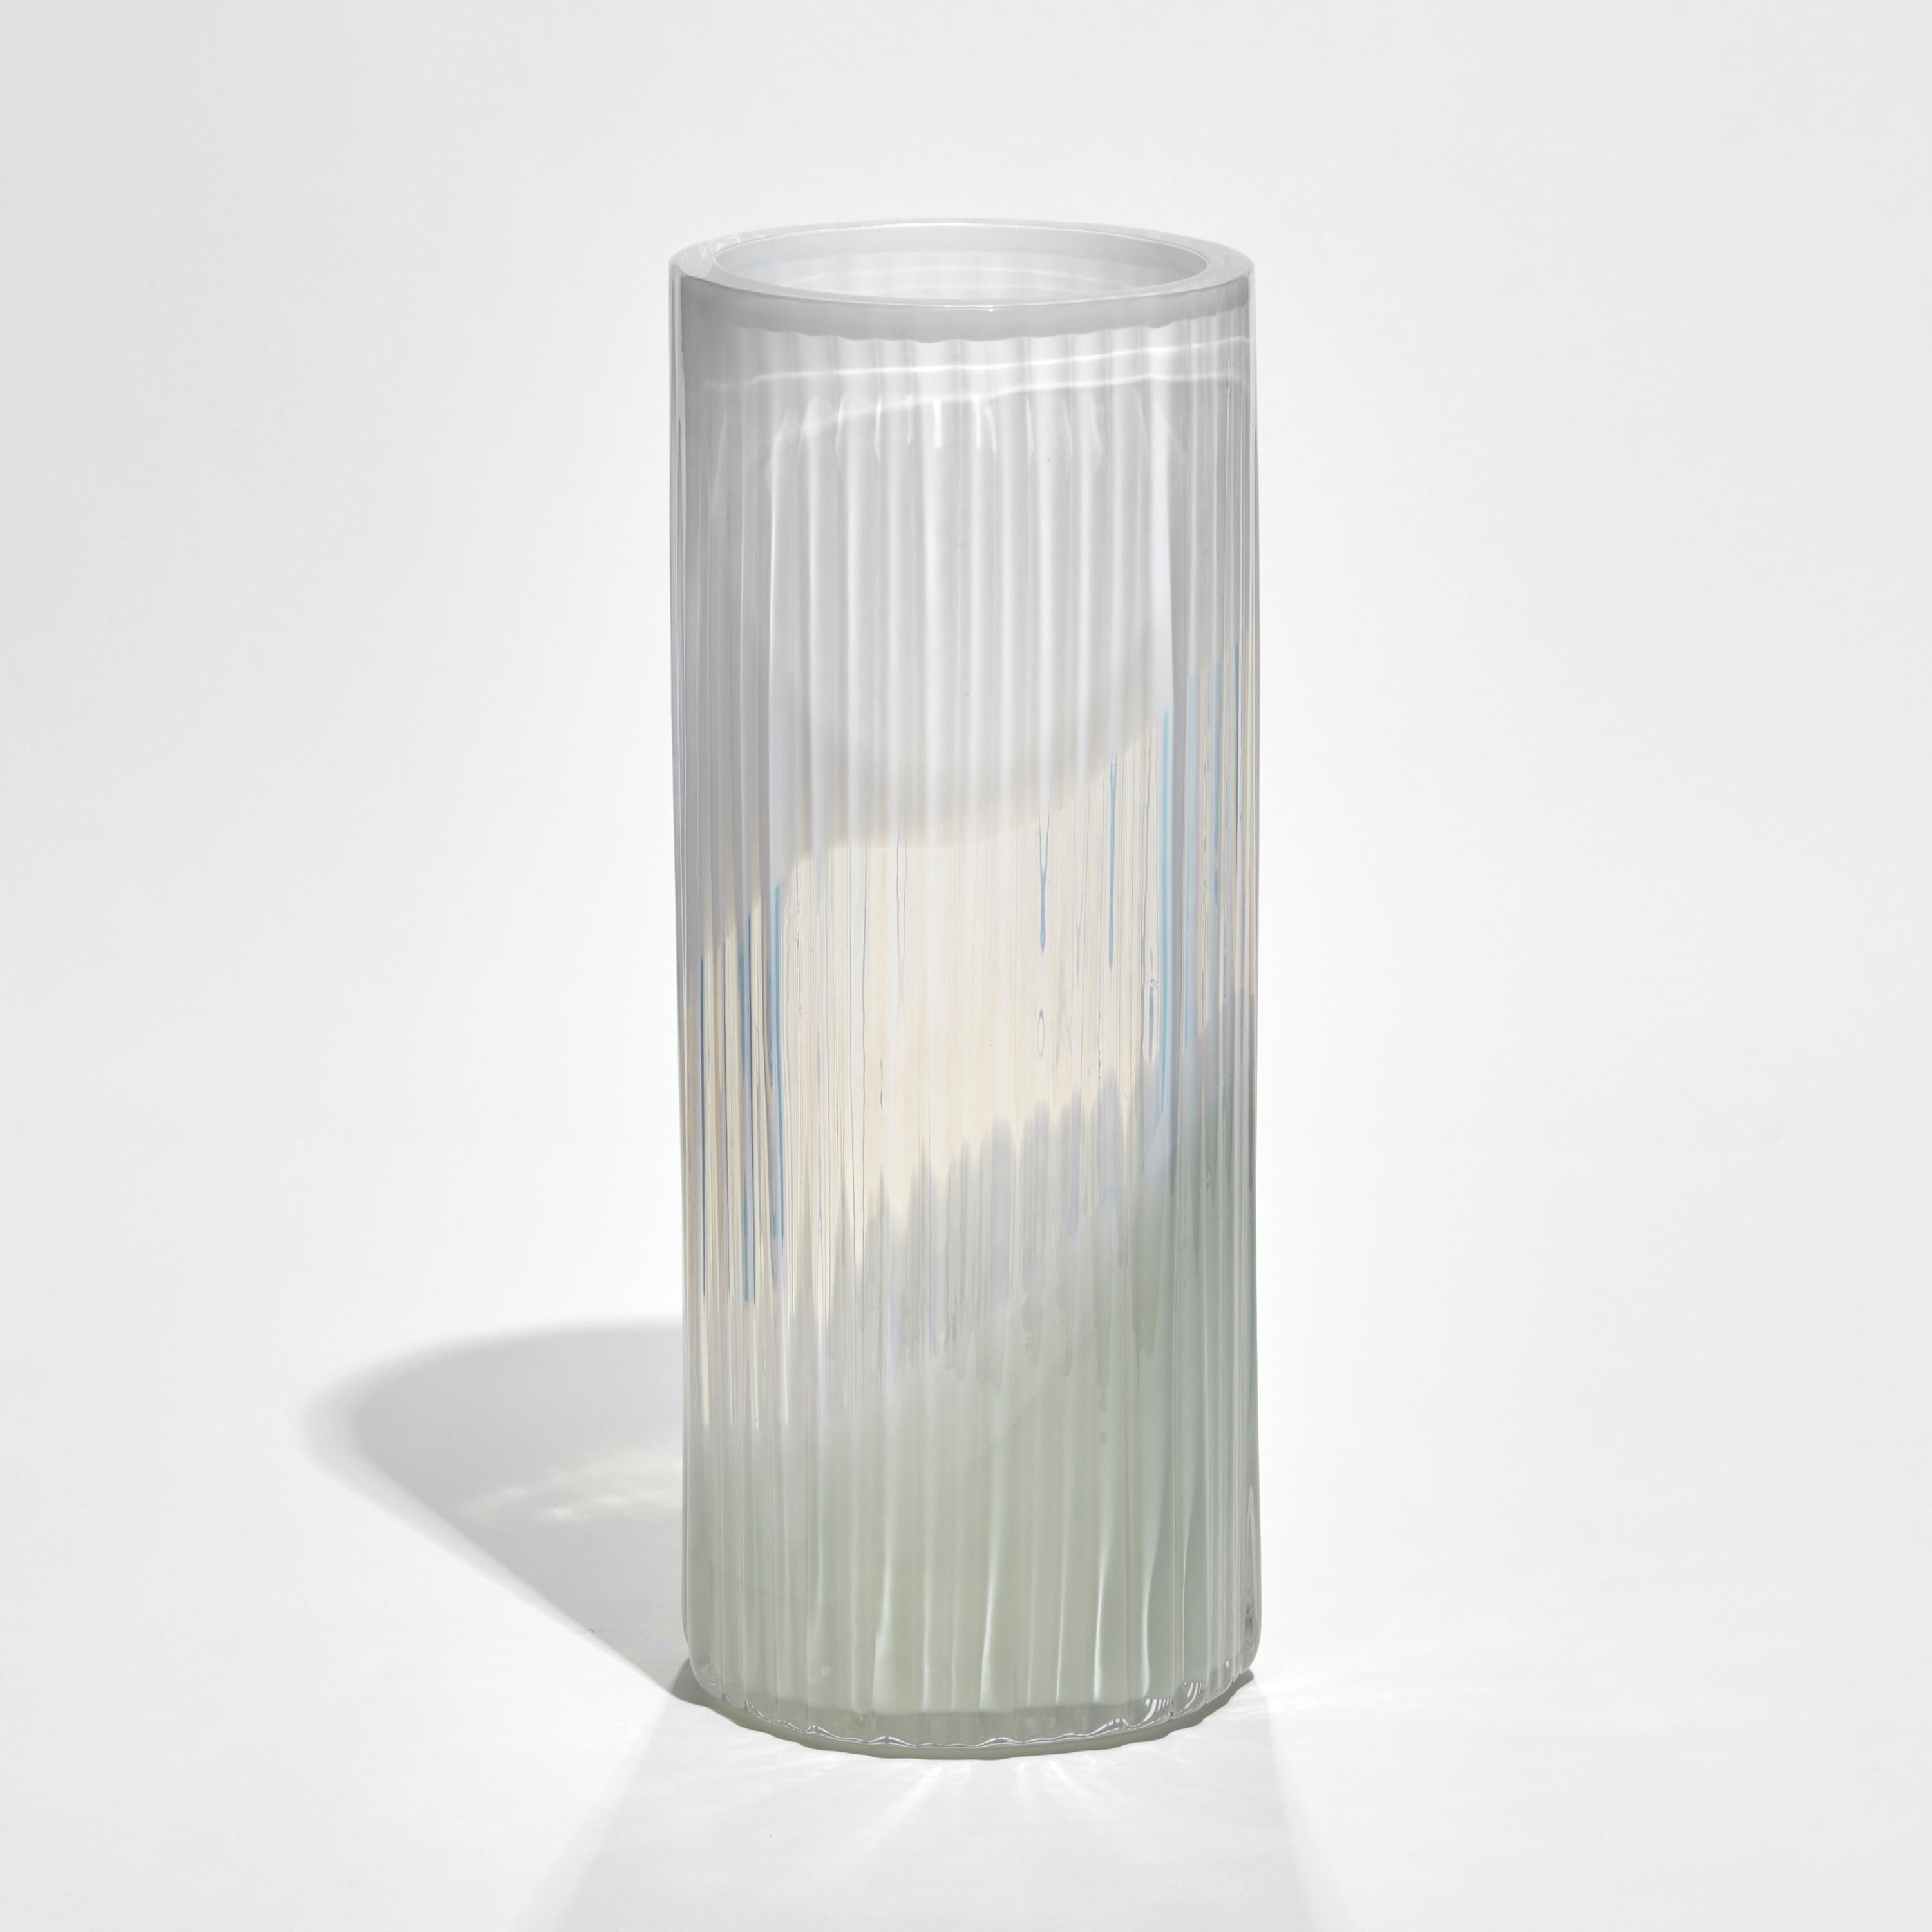 'Plissé vase in White & Celadon' is a limited edition vase by the Swedish artist and designer, Lena Bergström.

Created for 'Lena 25+', Bergström's 2022 solo exhibition celebrating the 25 years and more for which she has been designing glass for